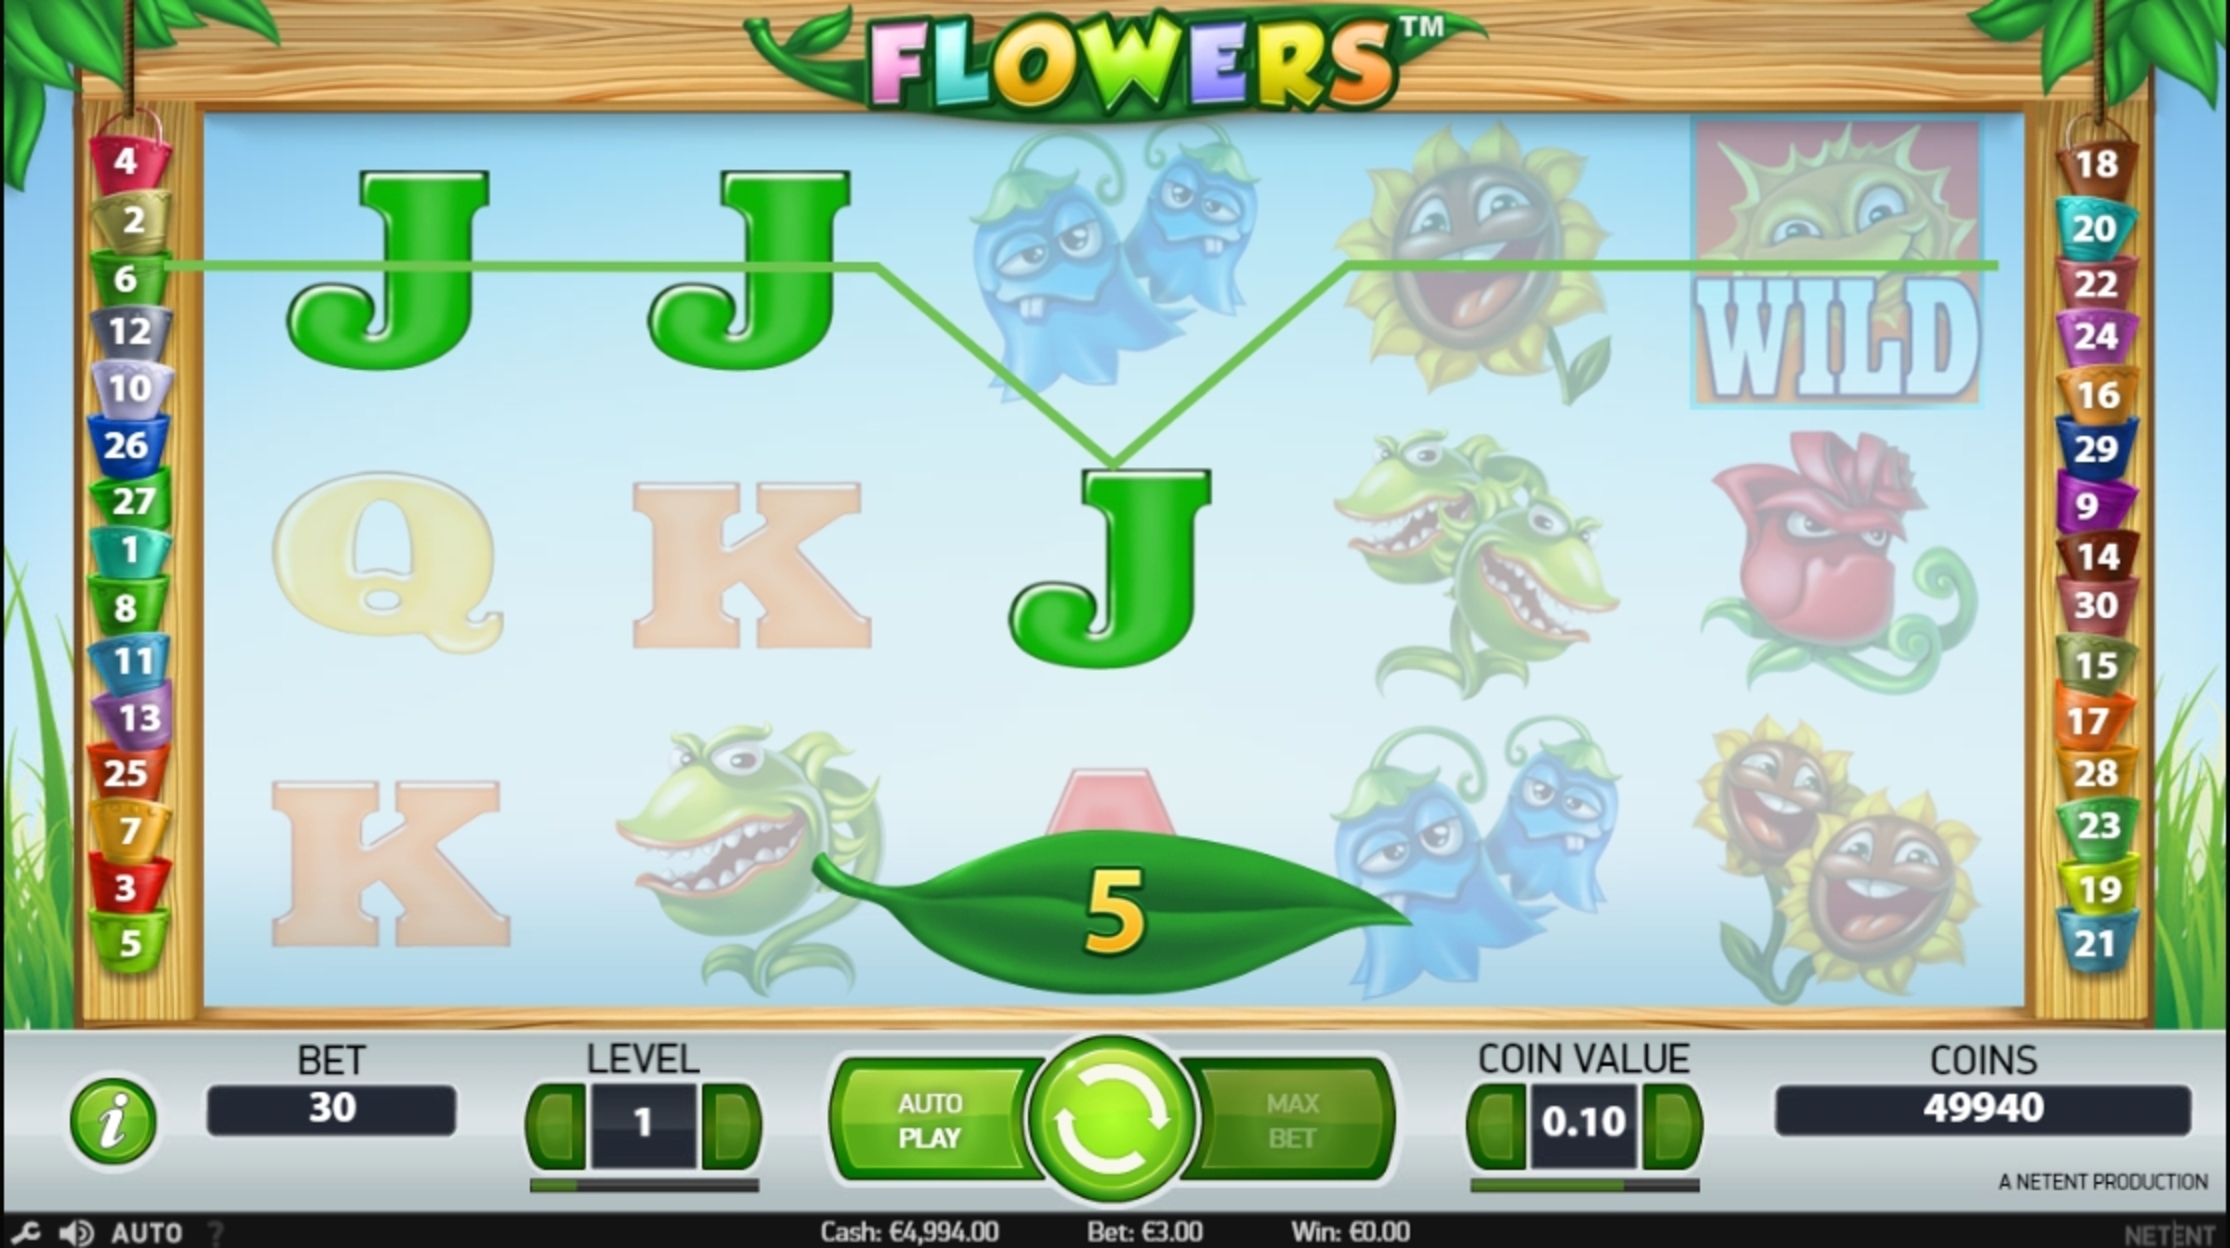 Win Money in Flowers Free Slot Game by NetEnt